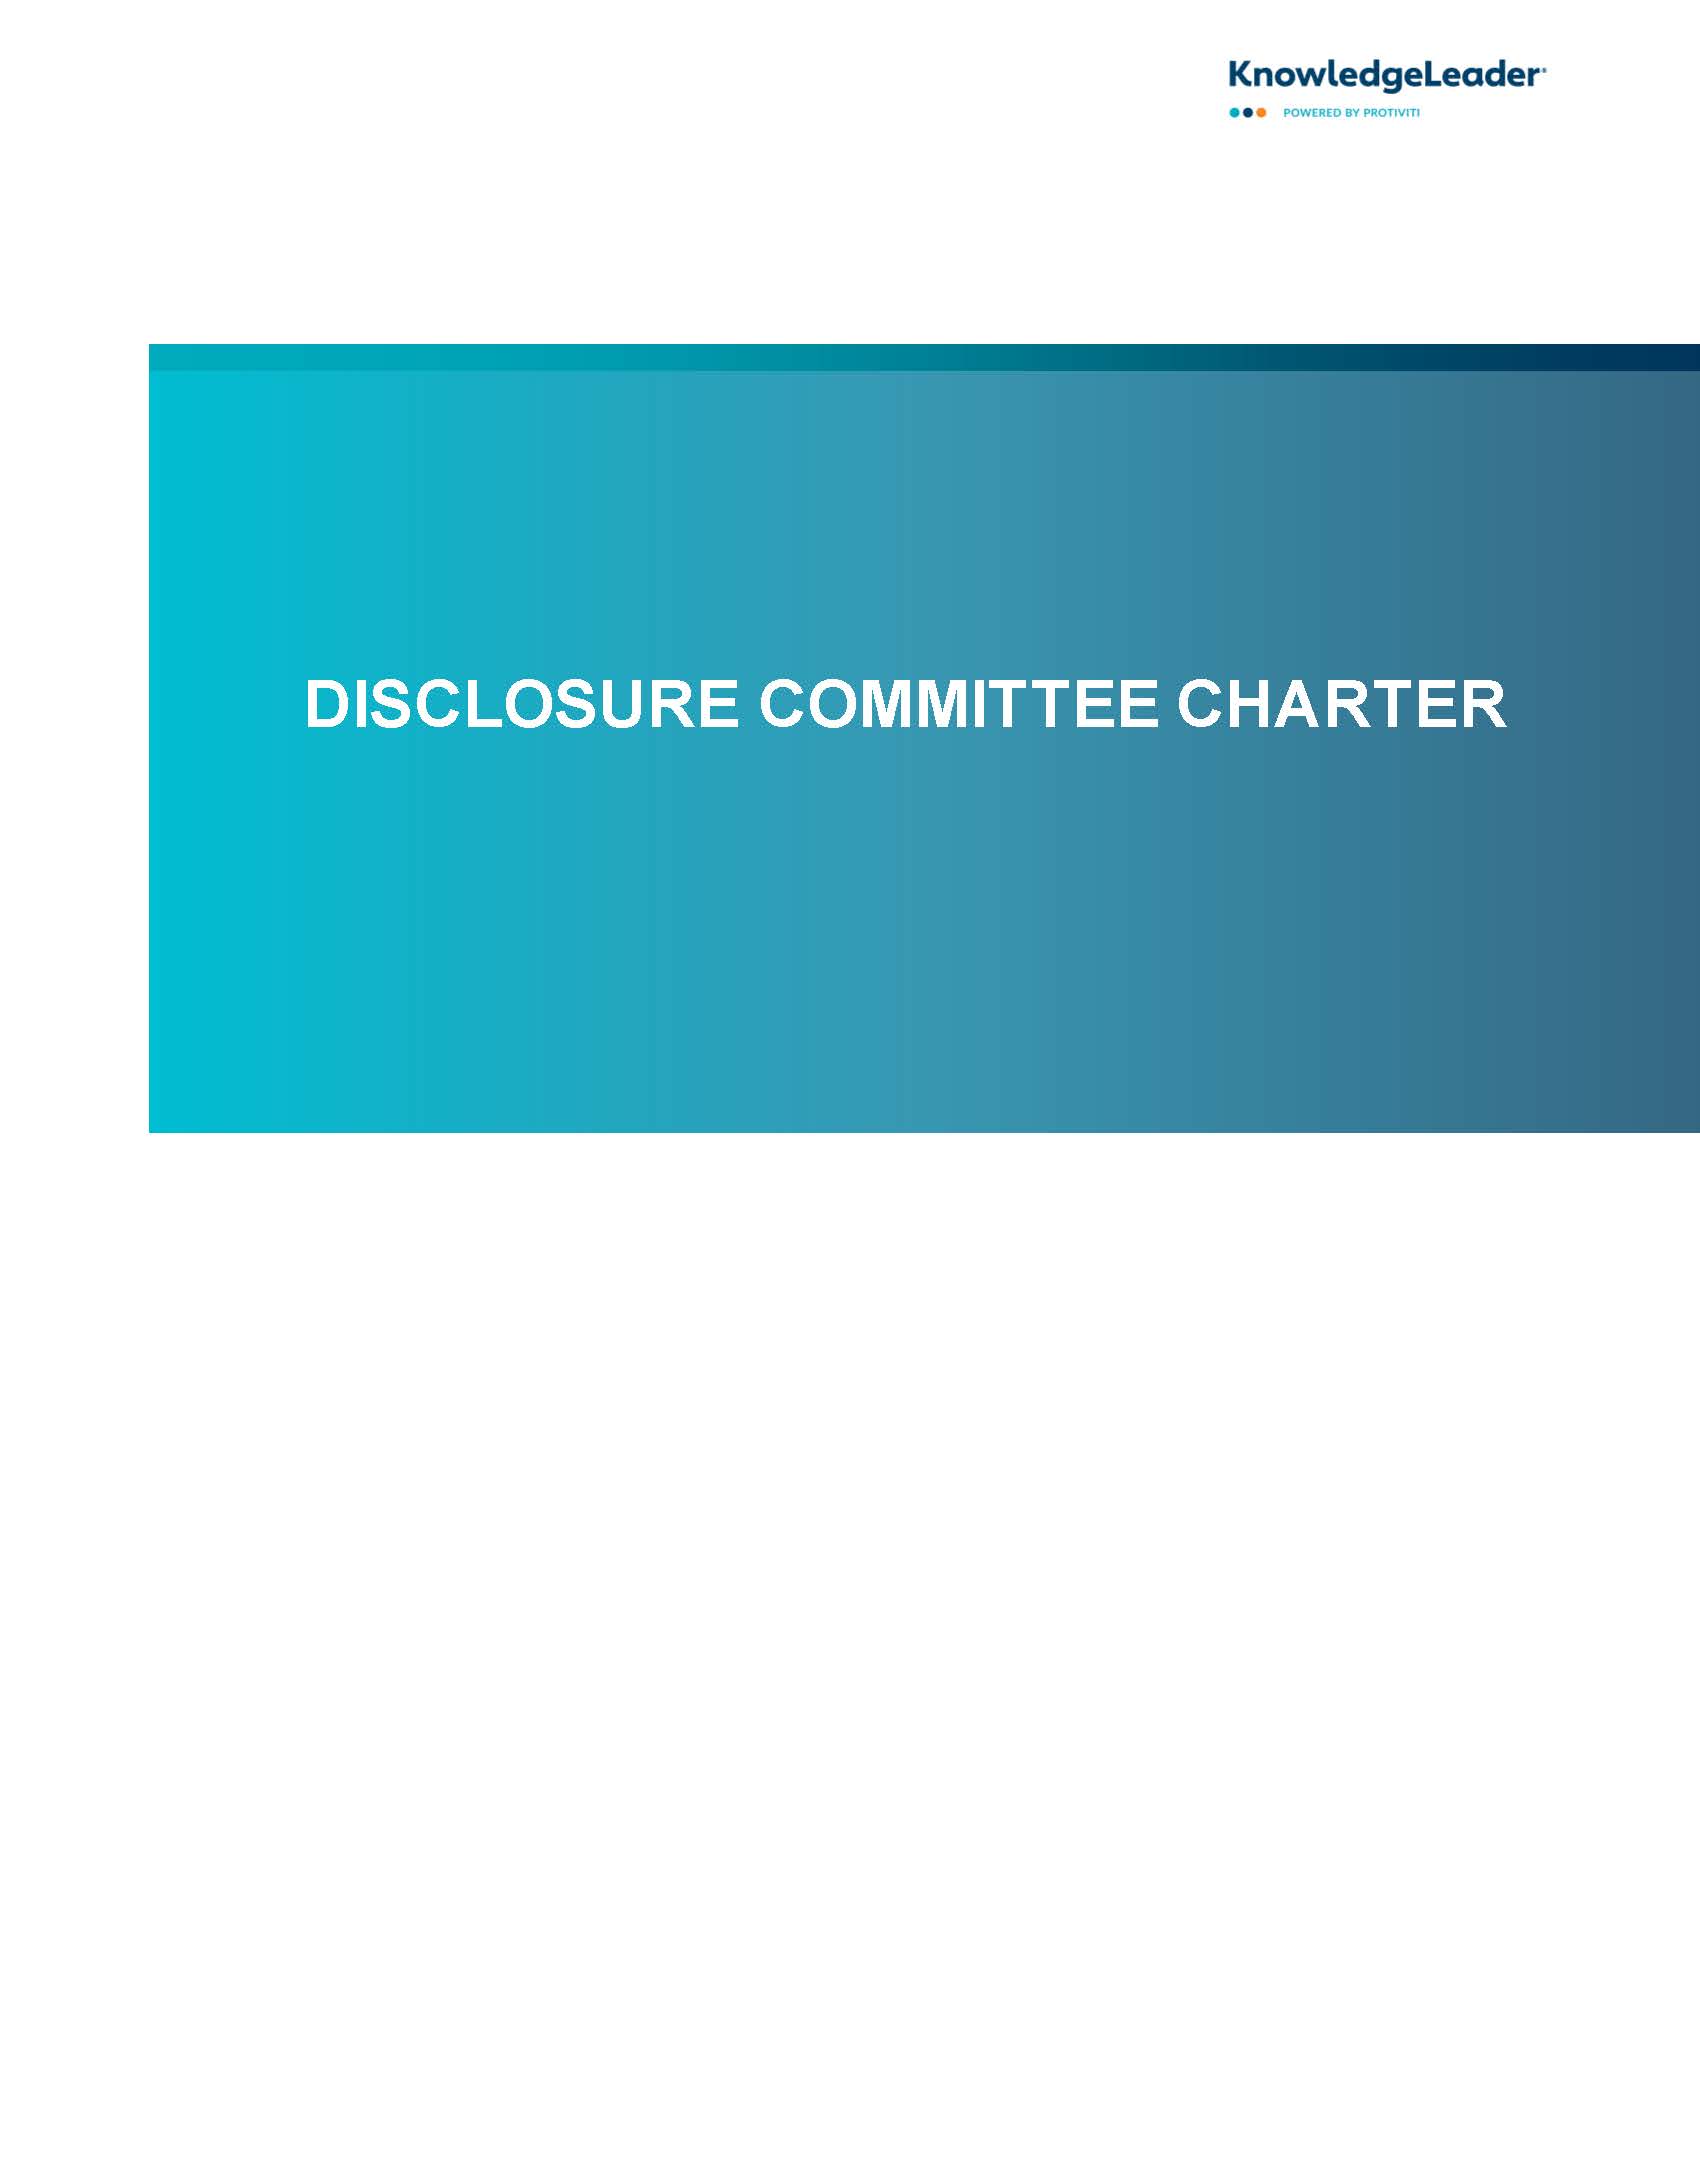 DISCLOSURE COMMITTEE CHARTER